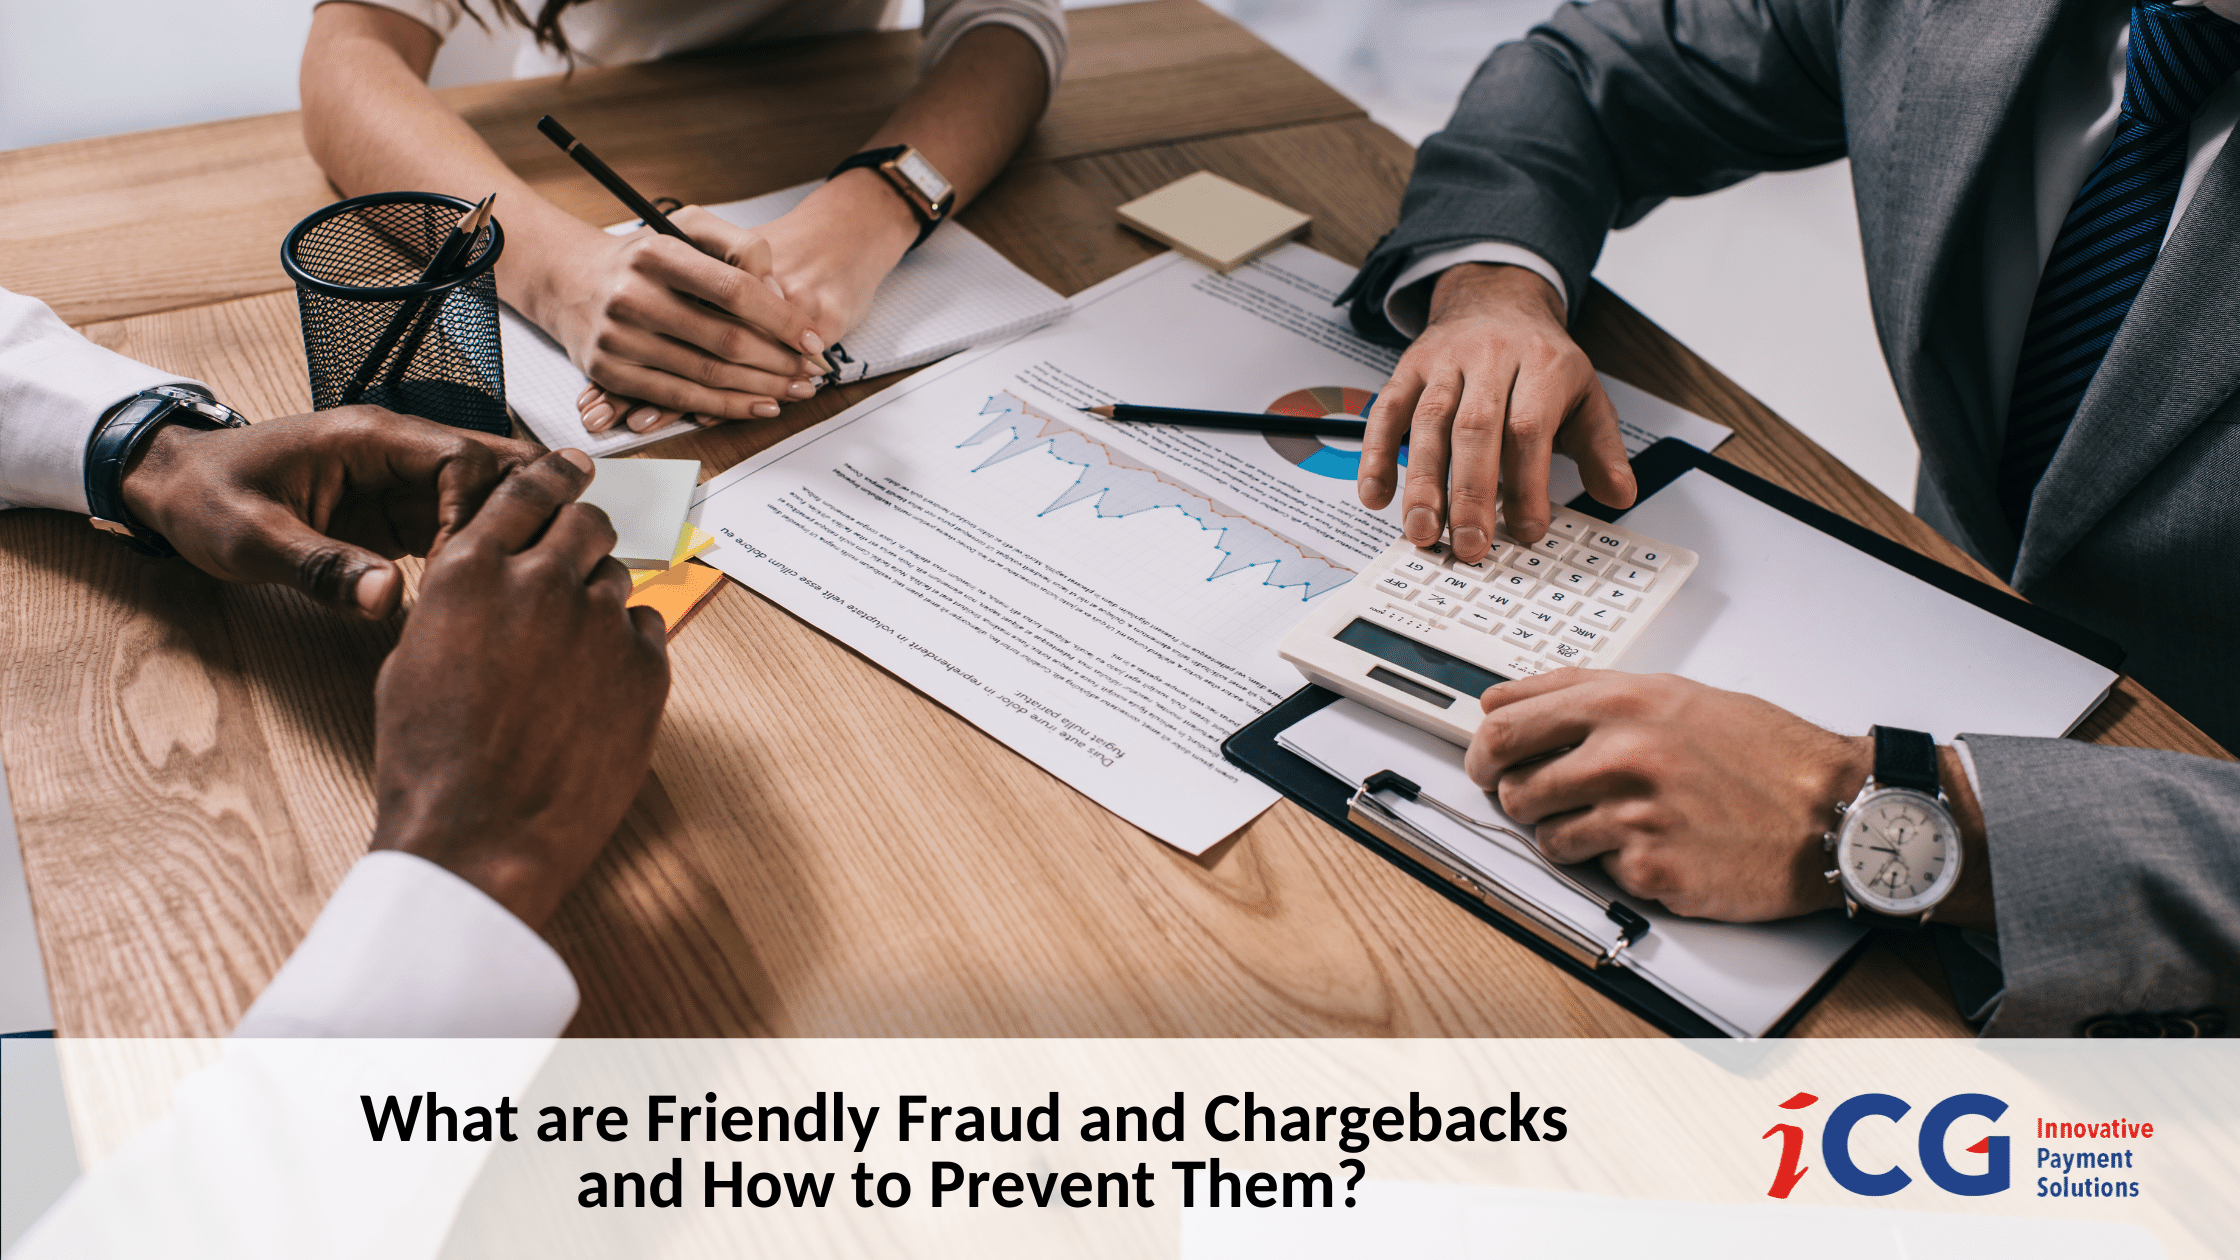 What are Friendly Fraud and Chargebacks and How to Prevent Them?